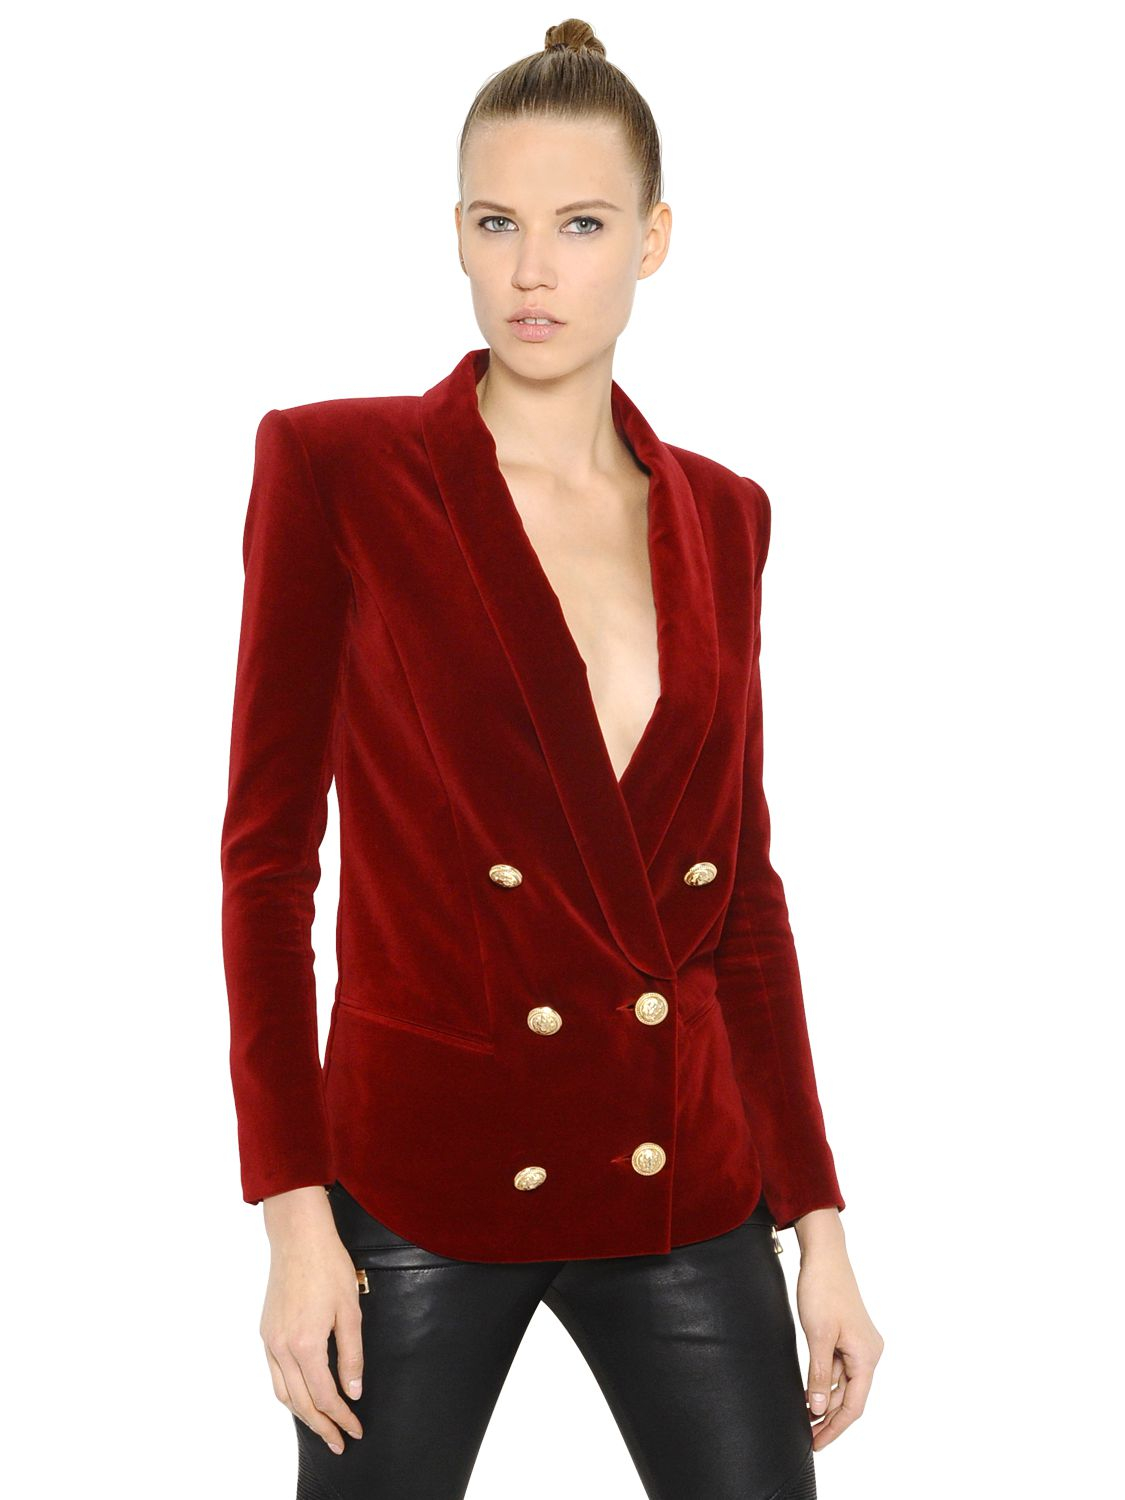 Lyst - Balmain Double Breasted Cotton Velvet Jacket in Red